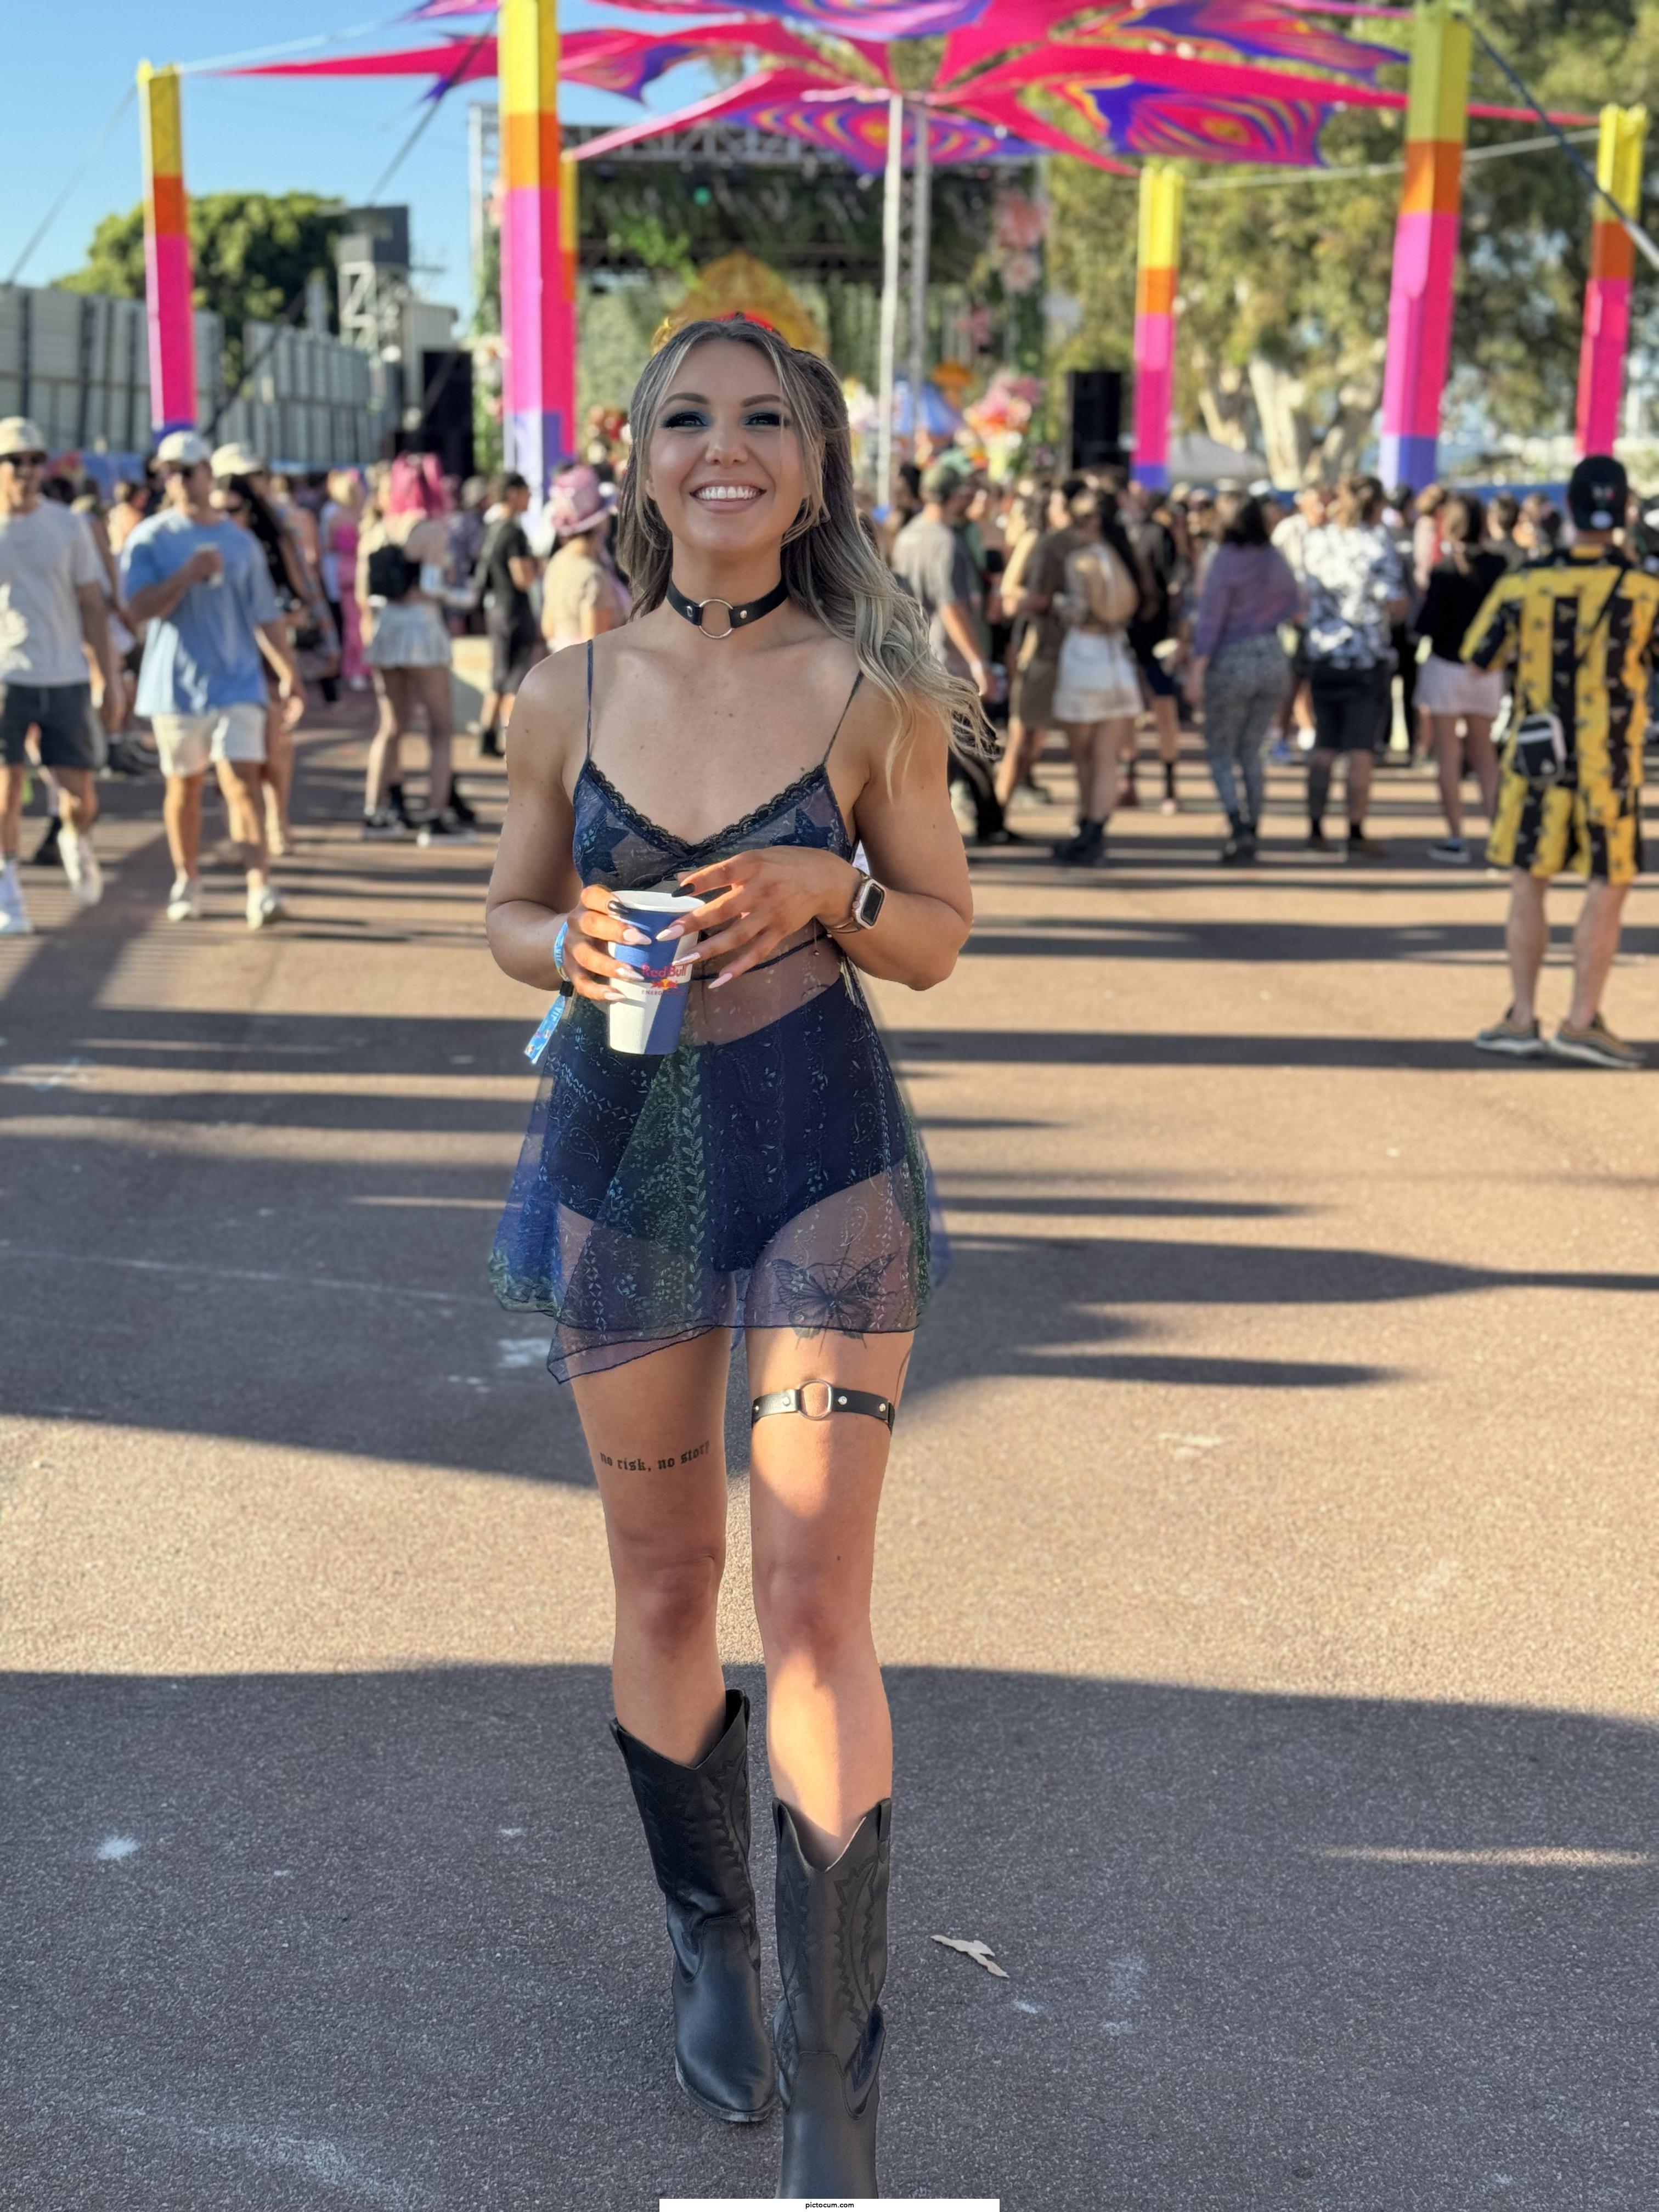 Happiest at a festival